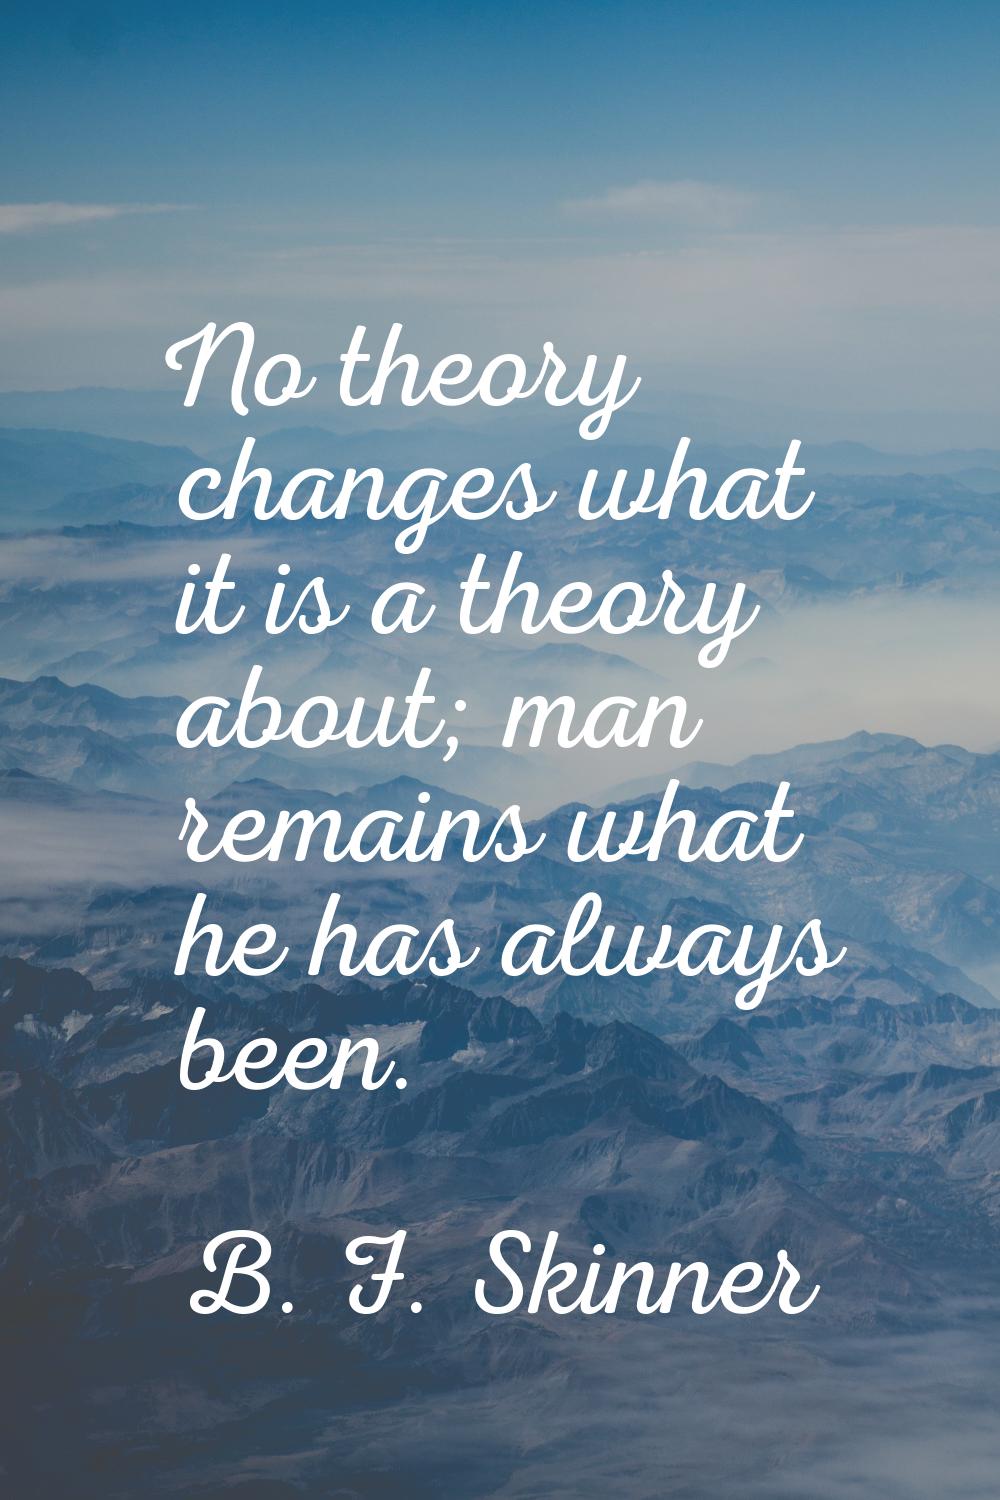 No theory changes what it is a theory about; man remains what he has always been.